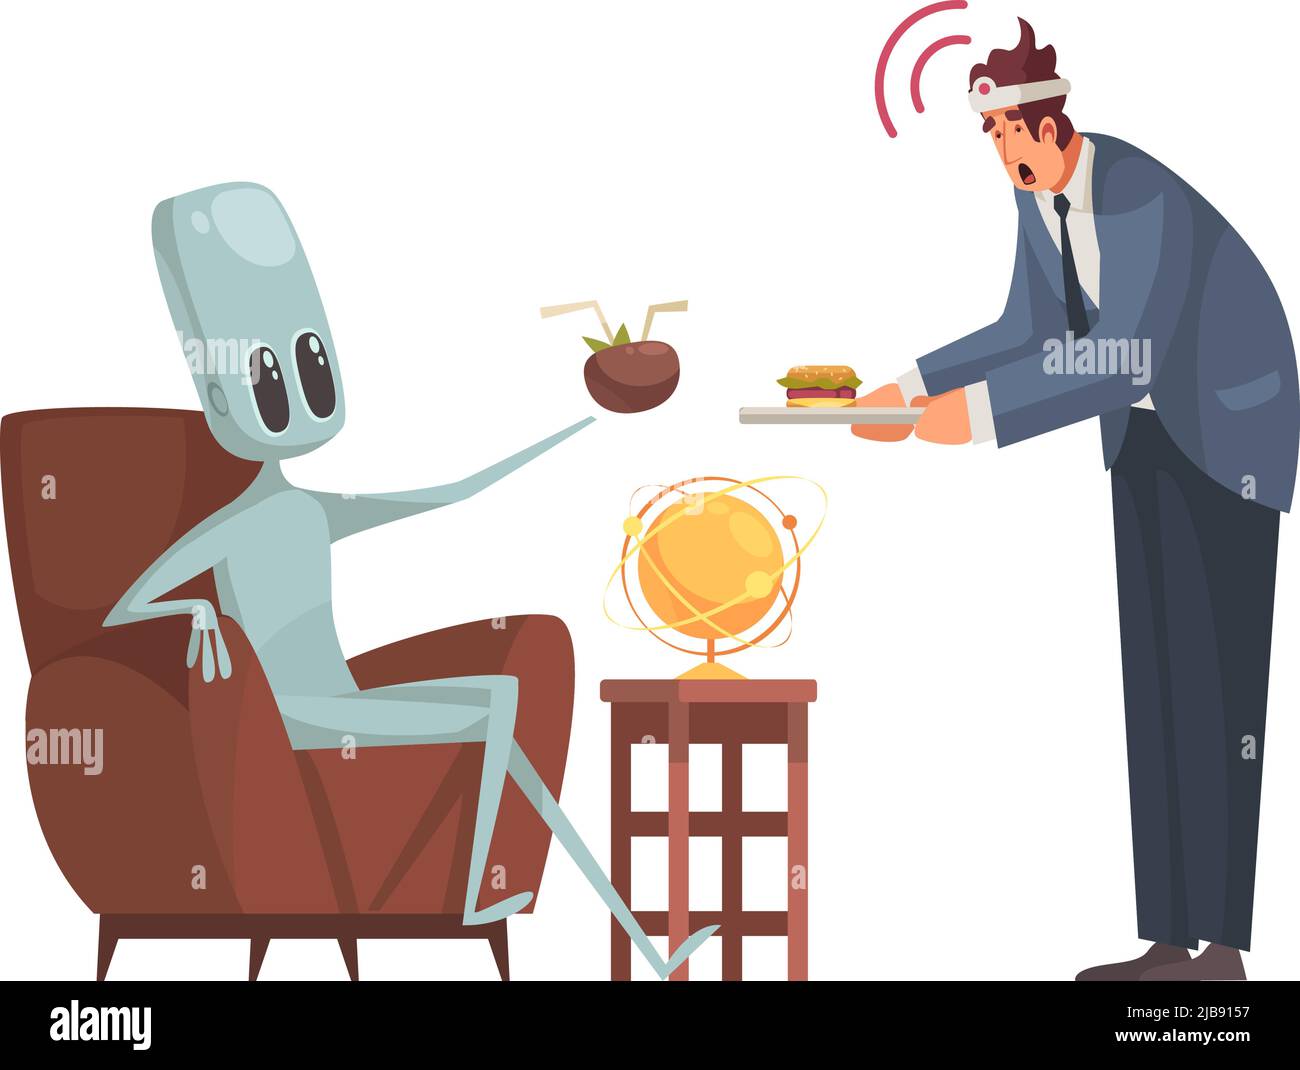 Alien controlling mind of human with tray cartoon vector illustration Stock Vector